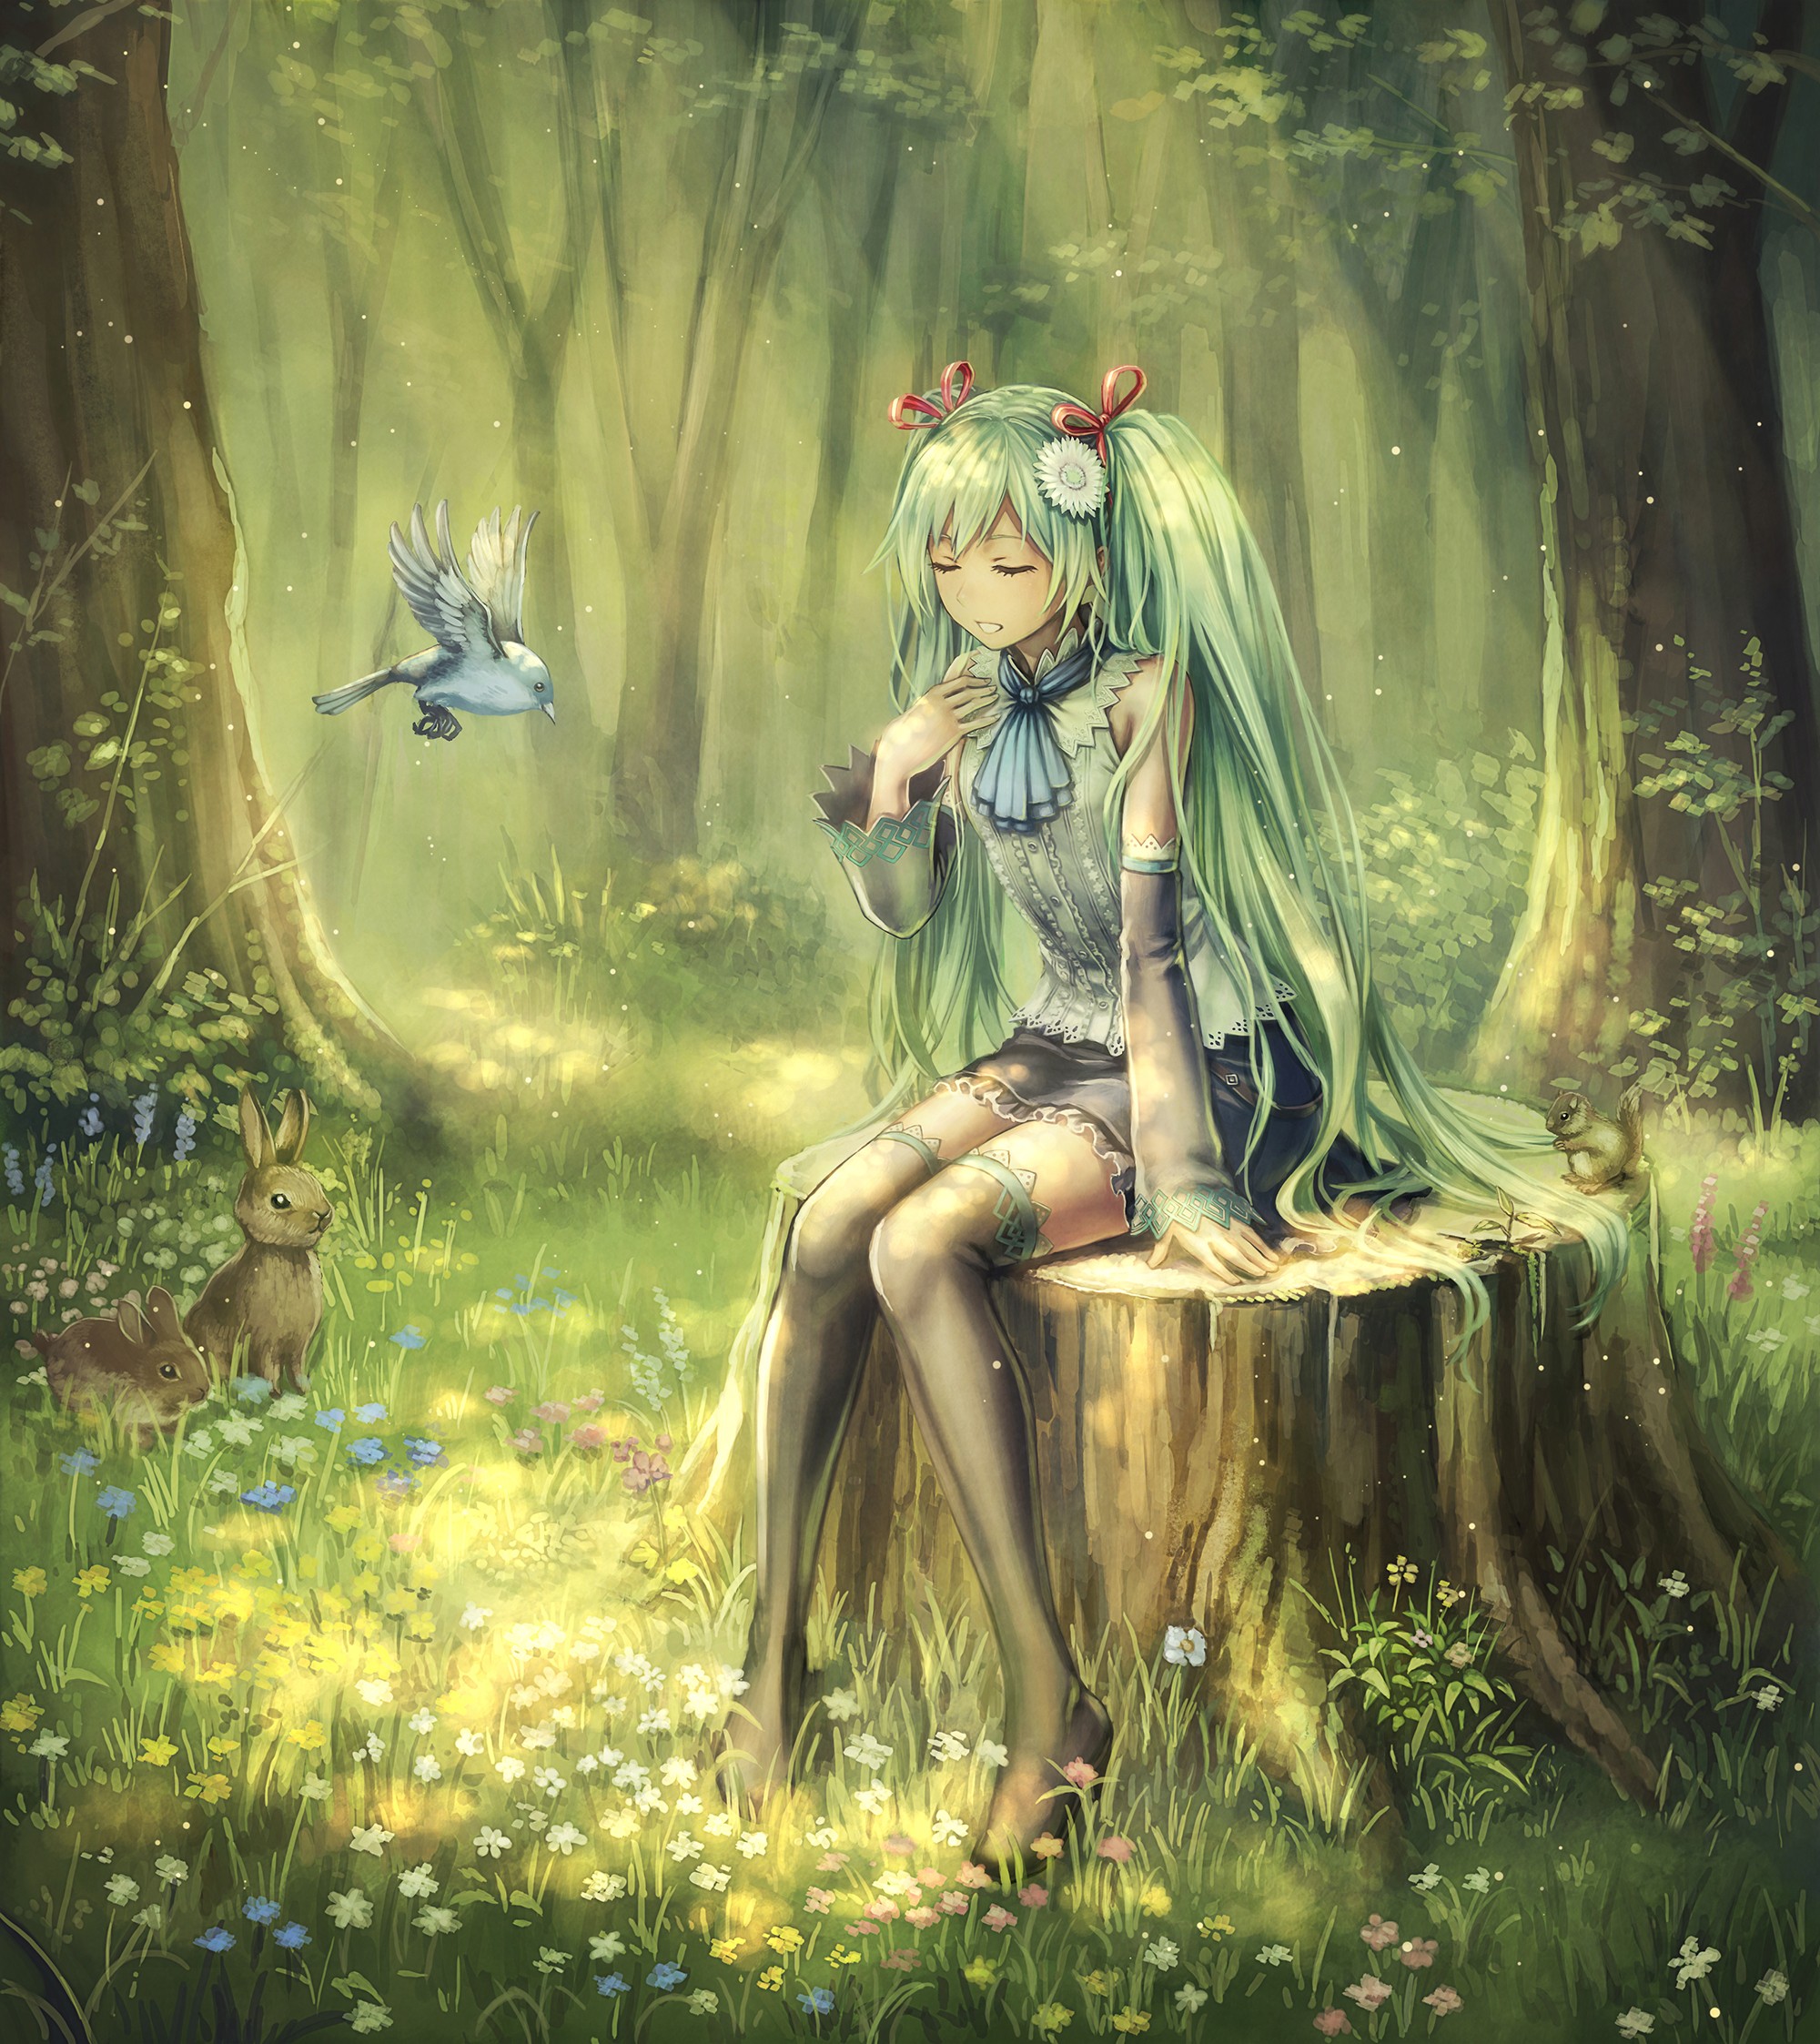 Anime 2000x2246 Vocaloid twintails anime girls fantasy art sitting stockings birds animals green hair long hair flower in hair knees together rabbits mammals flowers plants trees nature